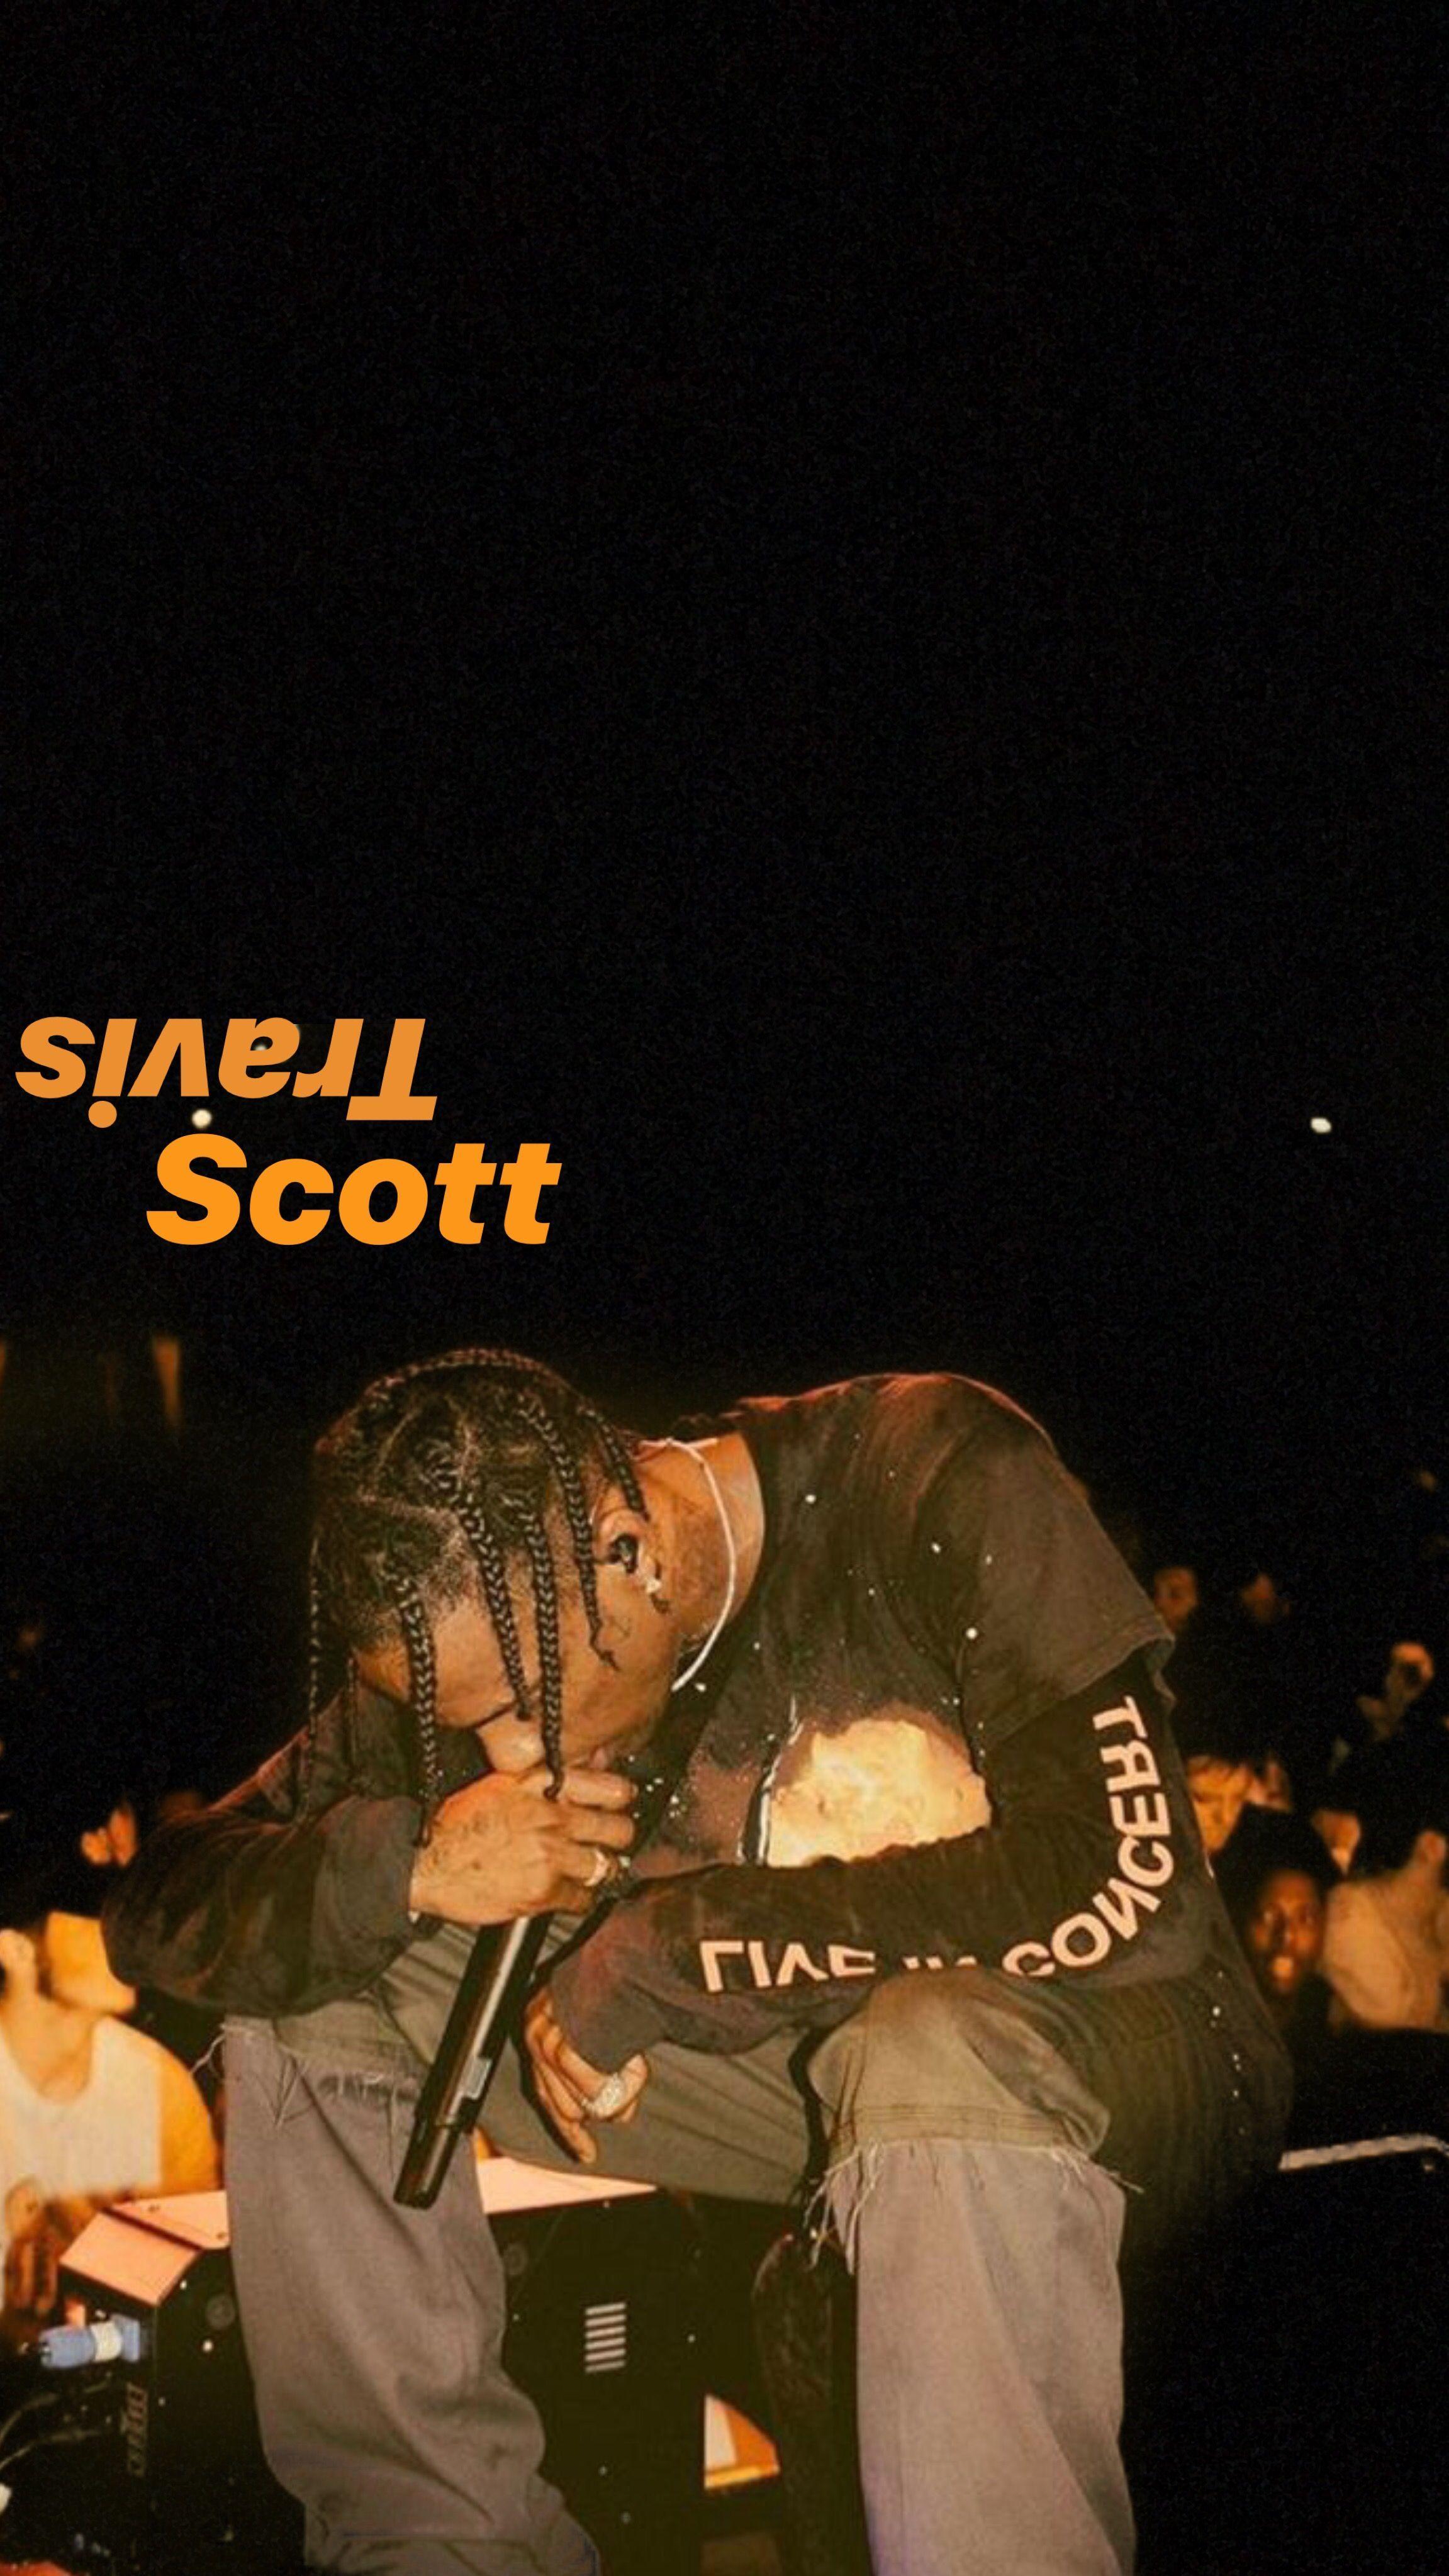 Travis Scott iPhone Wallpaper Awesome